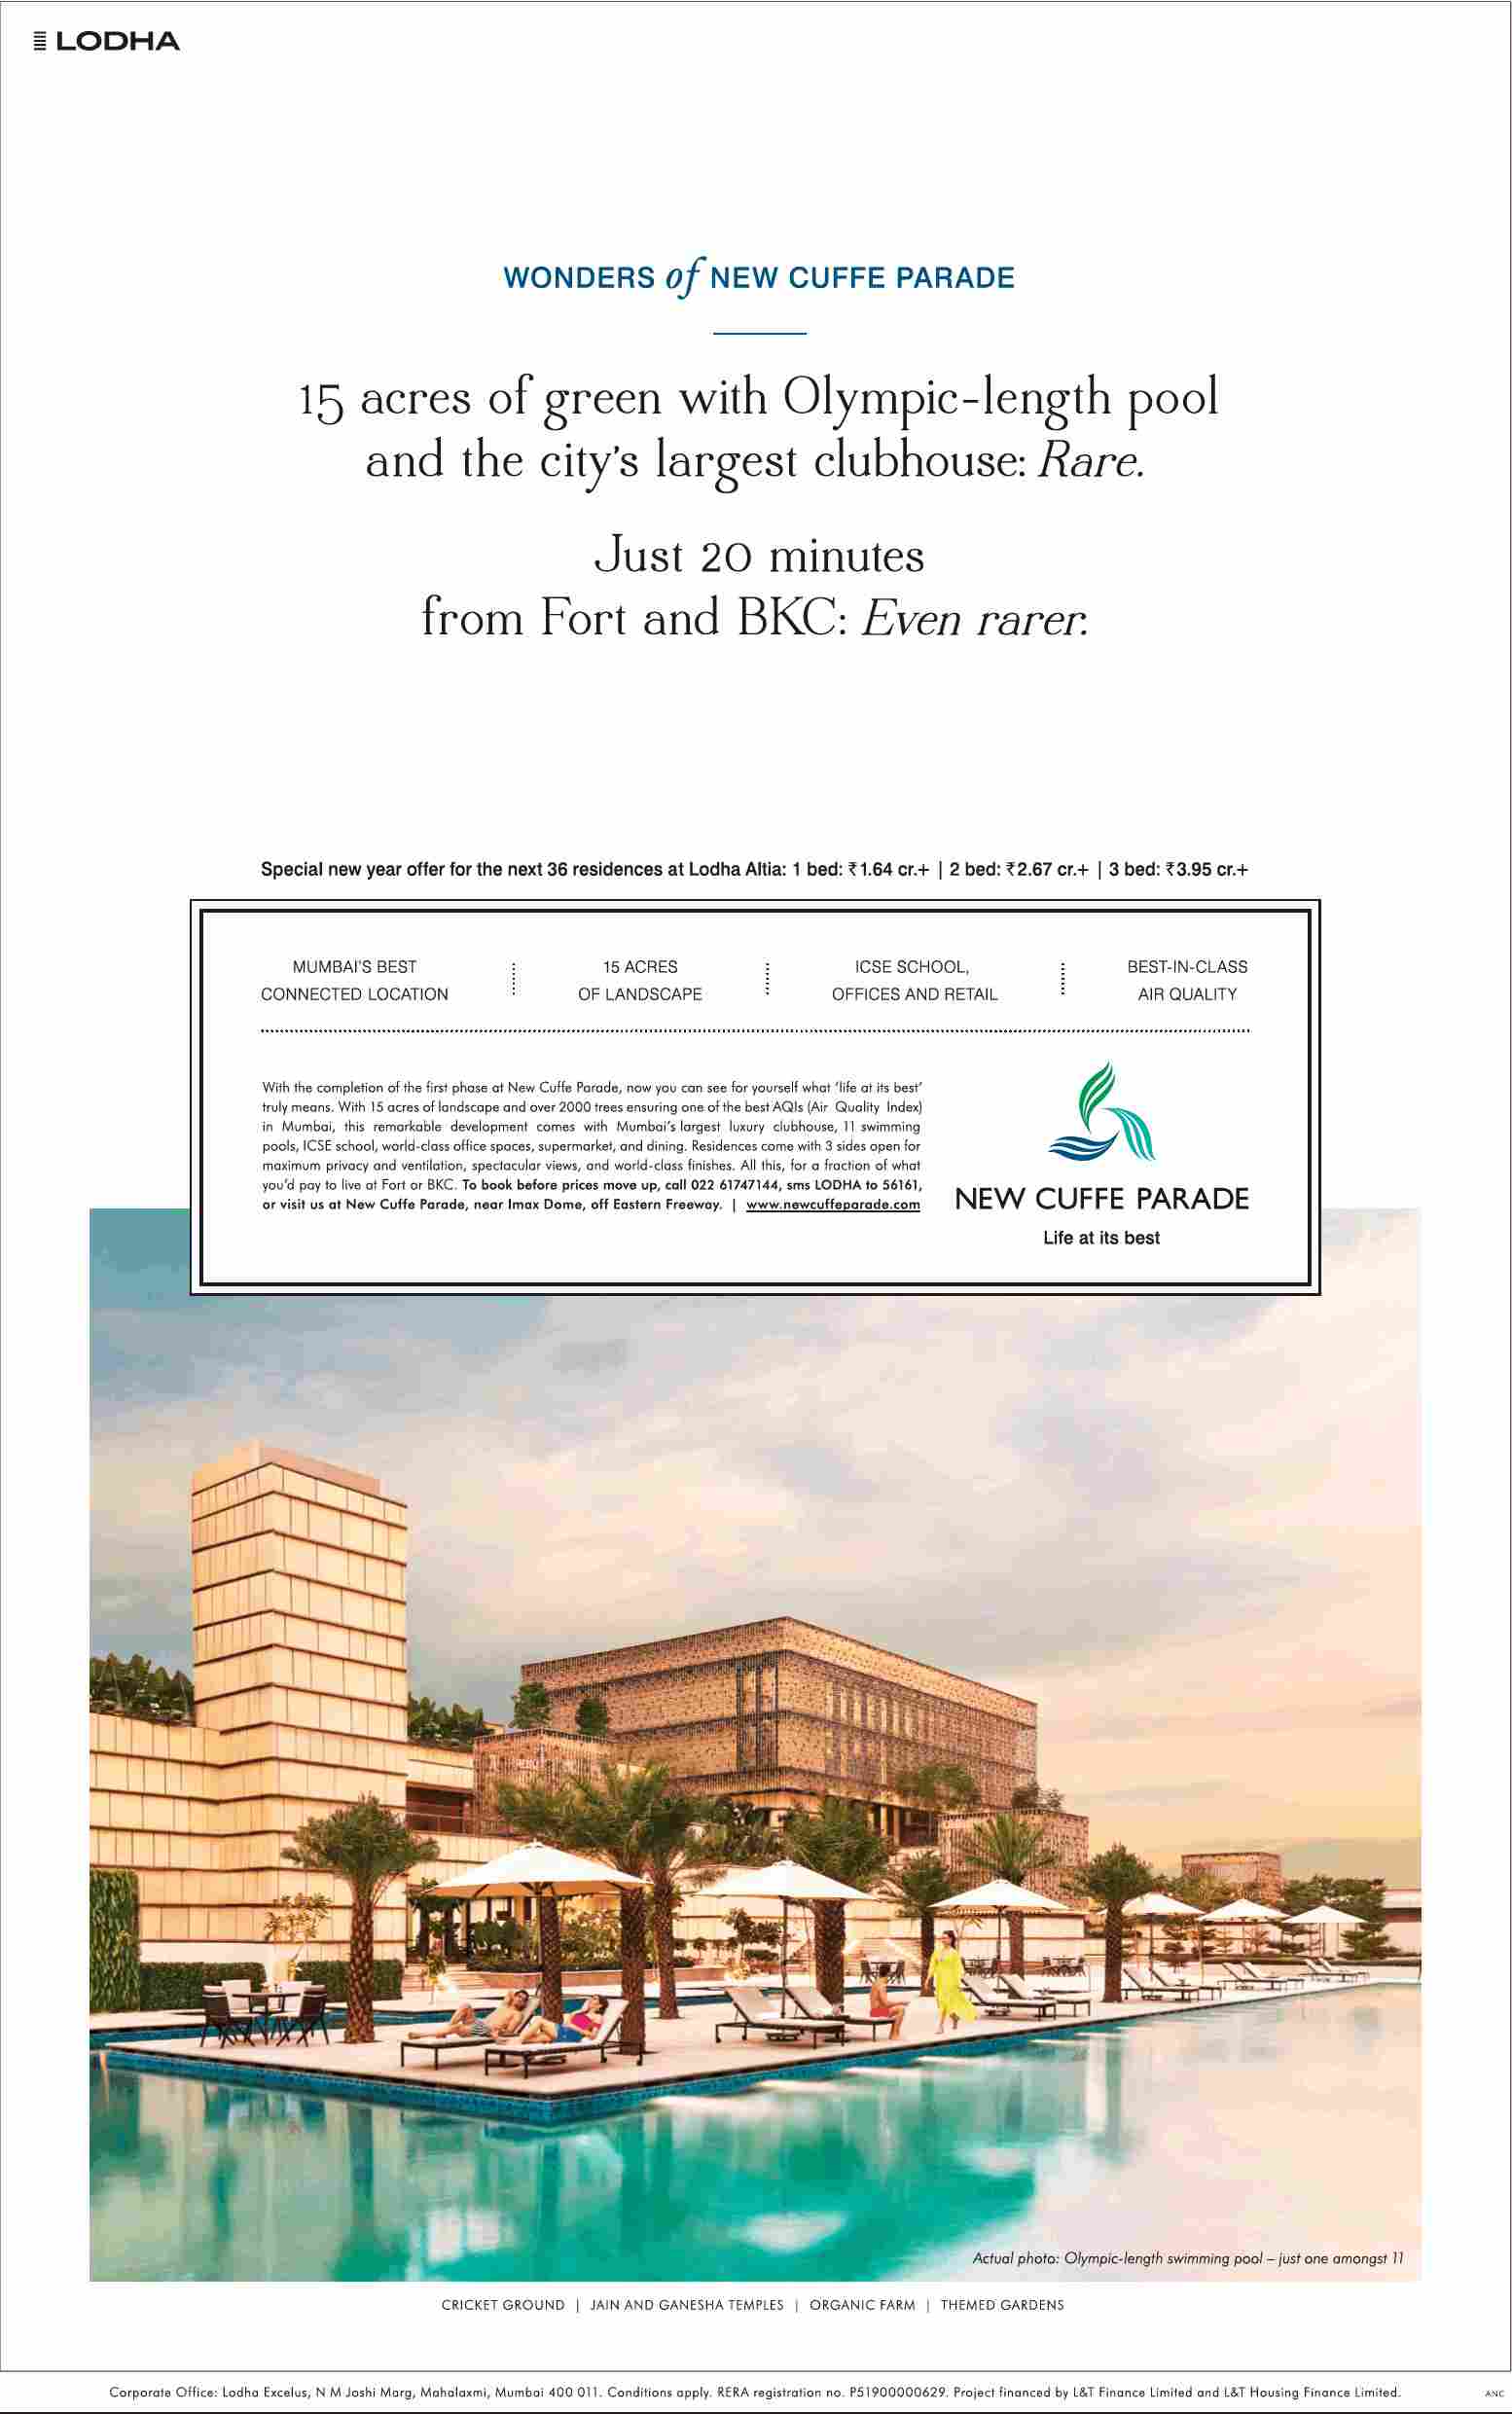 Enjoy 15 acres of green with Olympic-length pool & the city's largest clubhouse at Lodha New Cuffe Parade in Mumbai